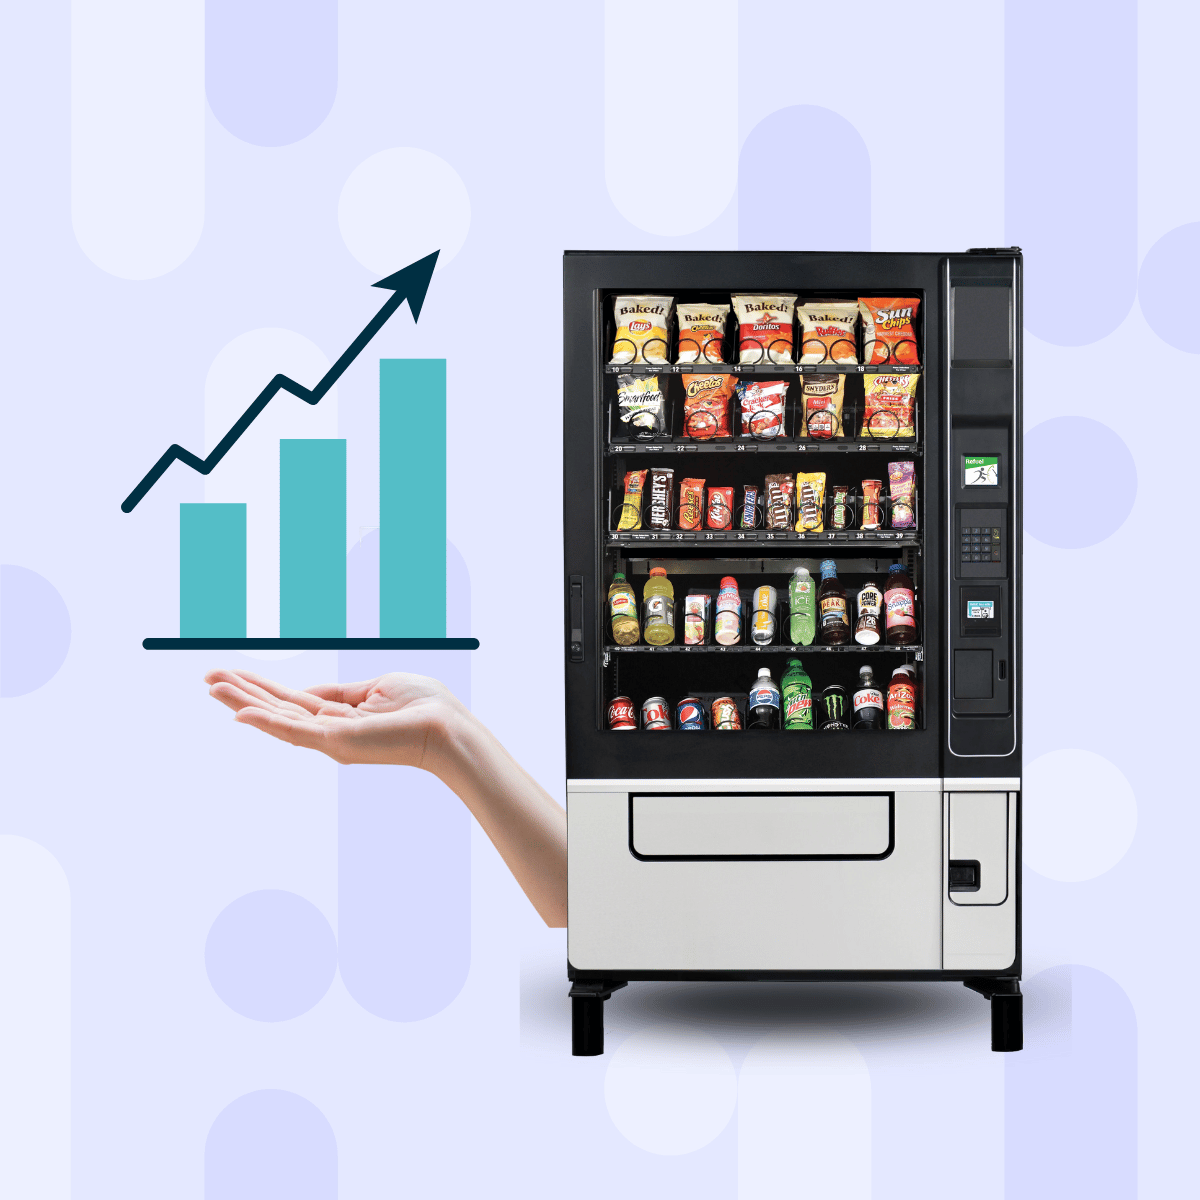 ARE USED VENDING MACHINES A GOOD INVESTMENT?